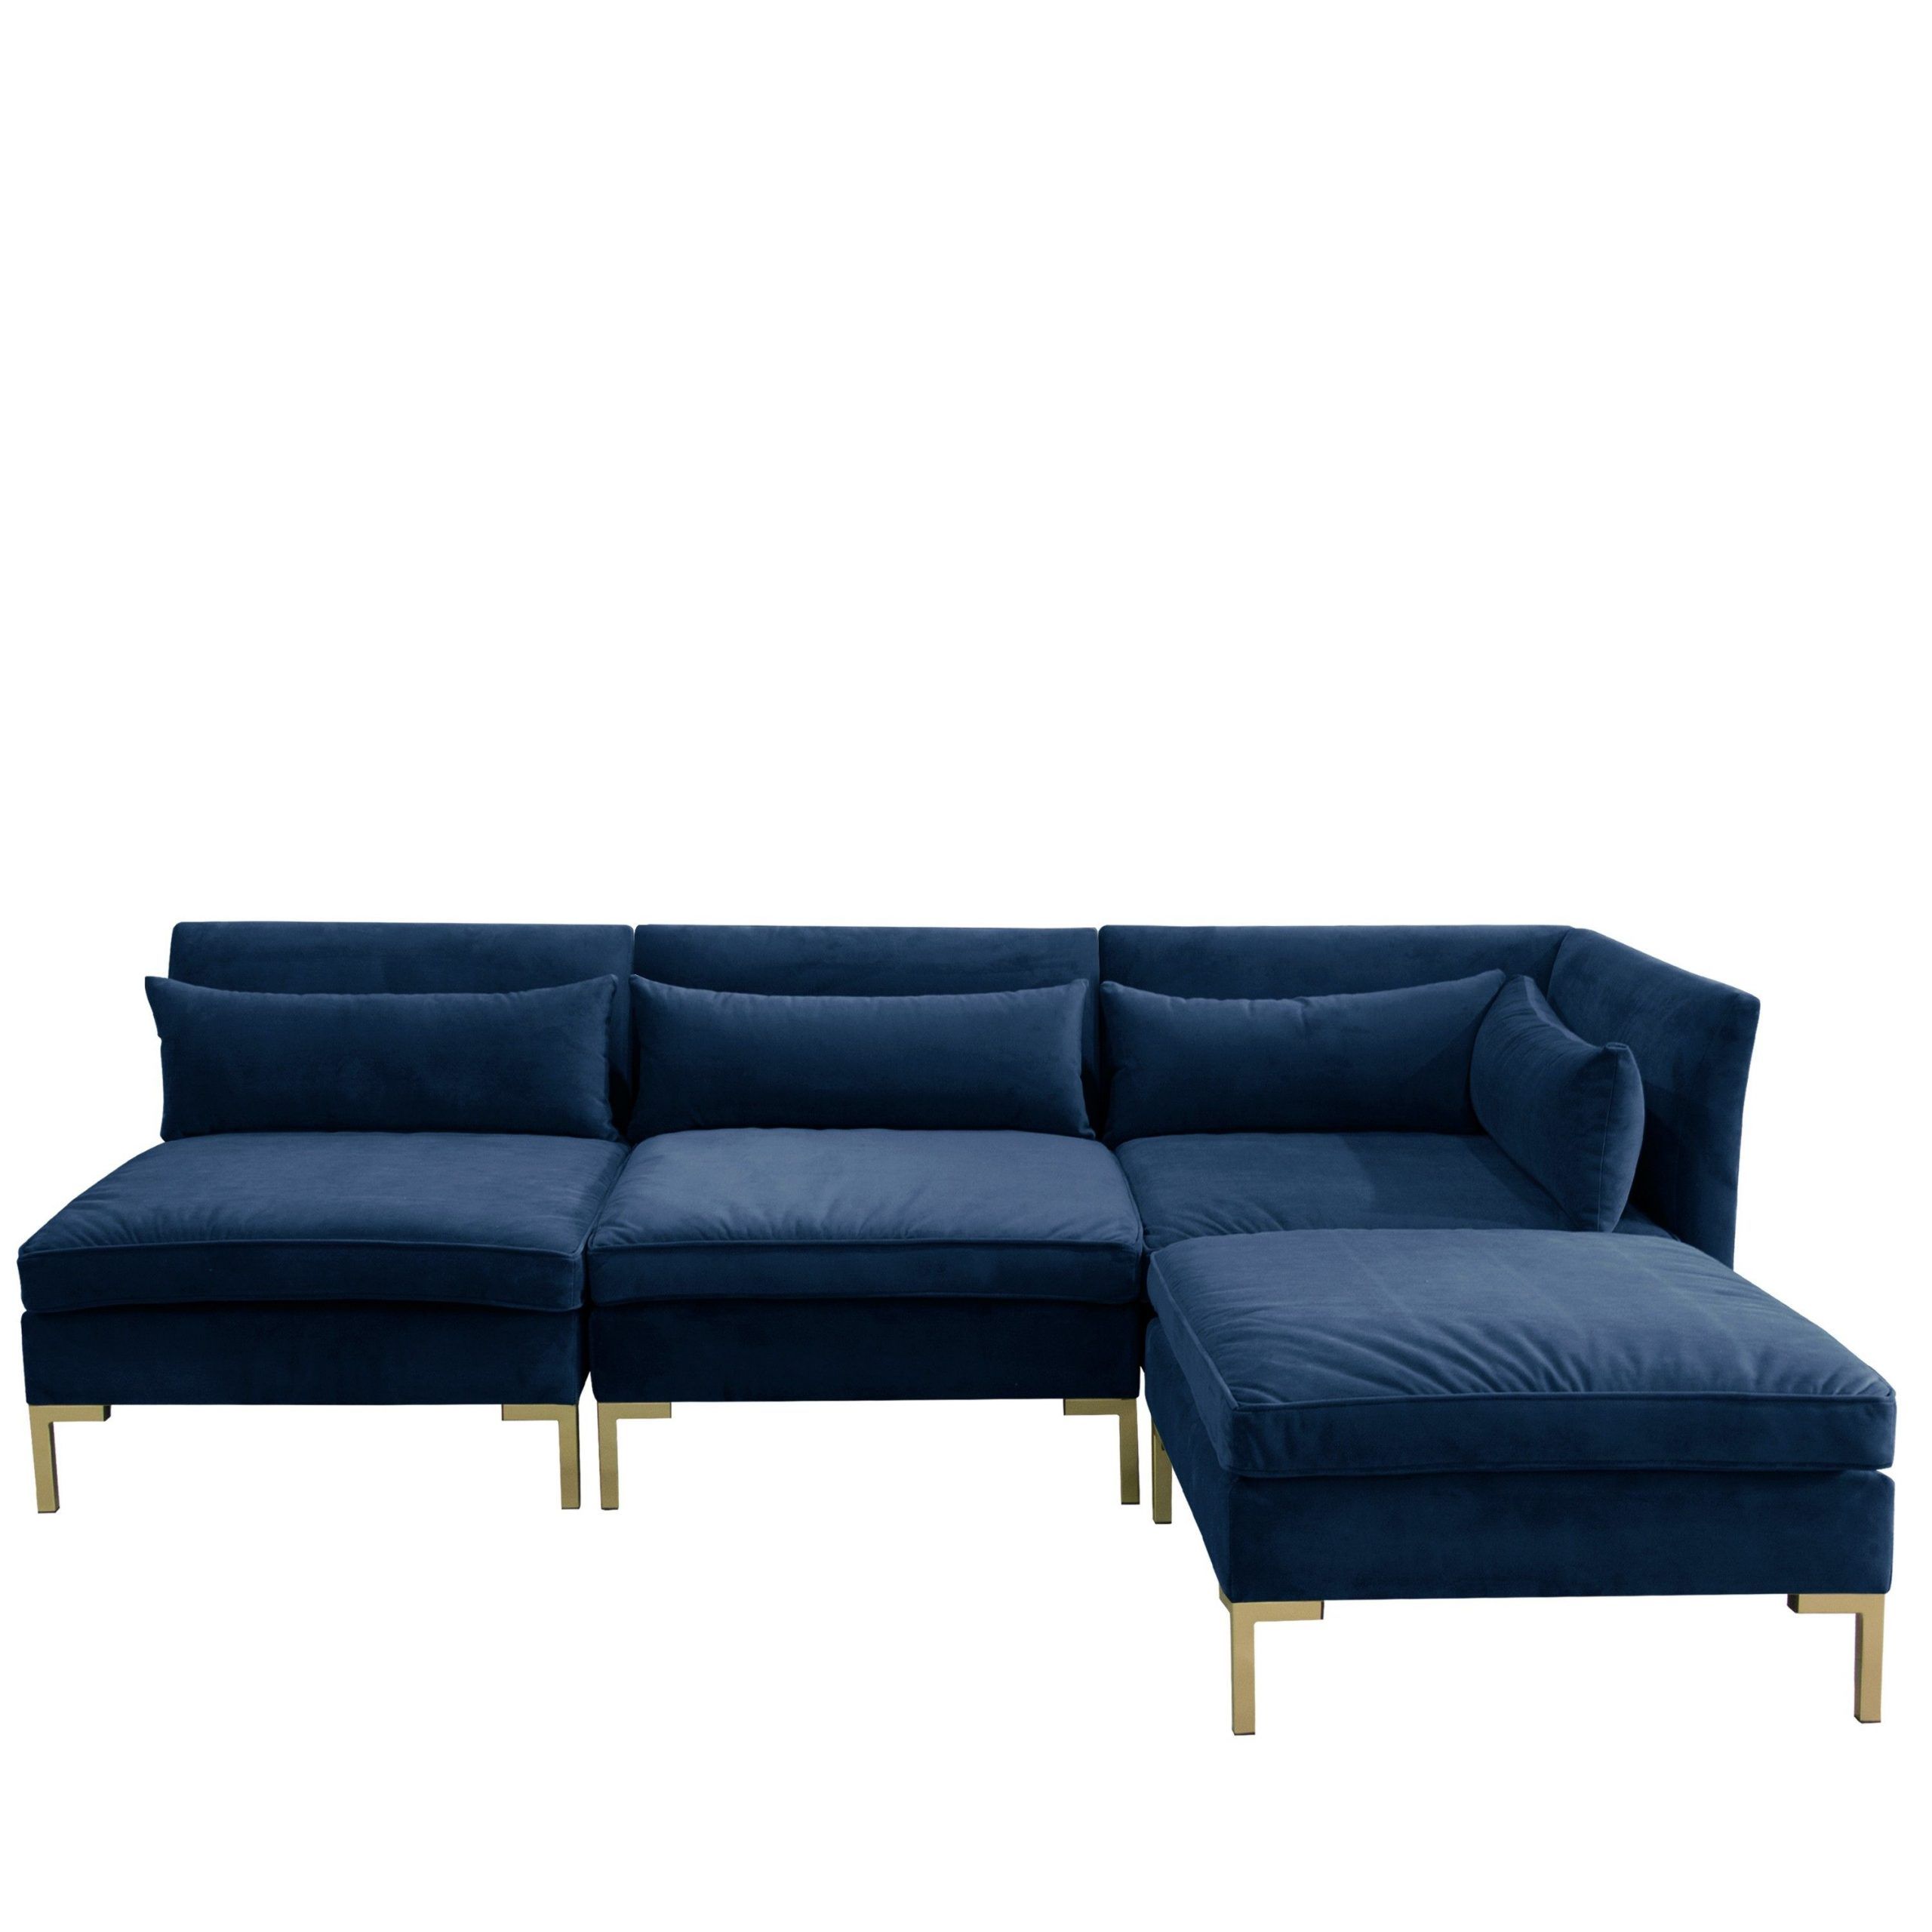 Alaina Velvet Sectional, Navy | Modular Sectional Sofa Inside 4Pc Alexis Sectional Sofas With Silver Metal Y Legs (View 10 of 15)